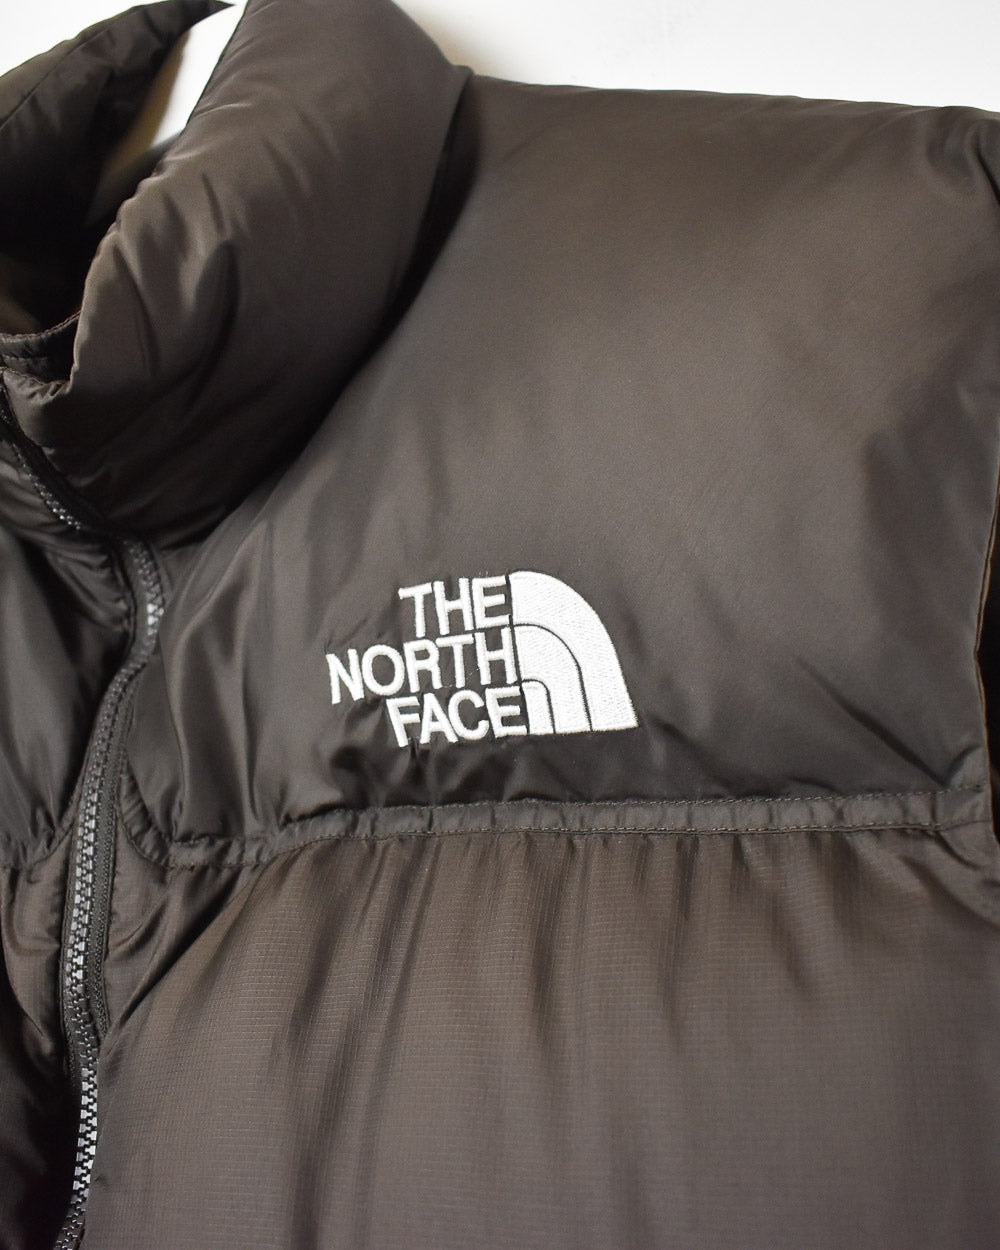 Brown The North Face 700 Down Gilet - X-Large